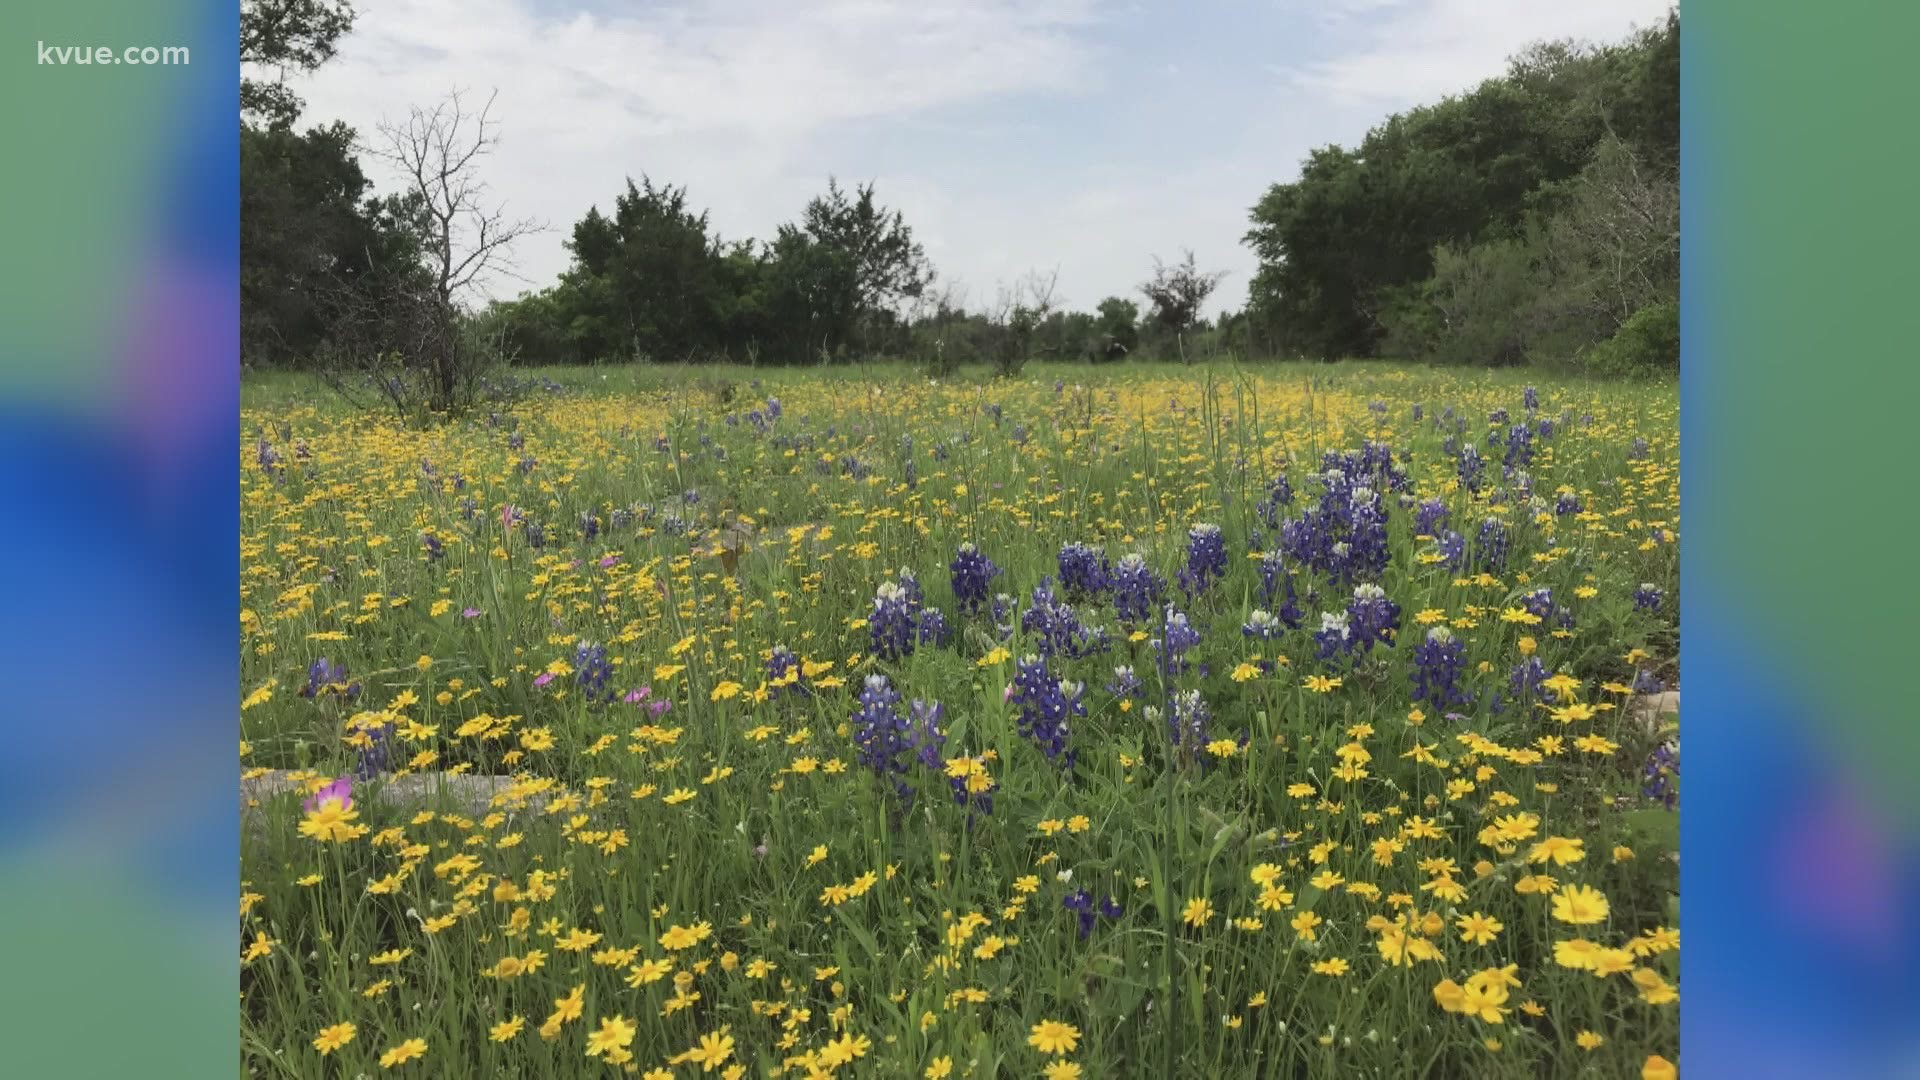 Bluebonnets have survived the Texas freeze! Some have already been spotted in the Hill Country.